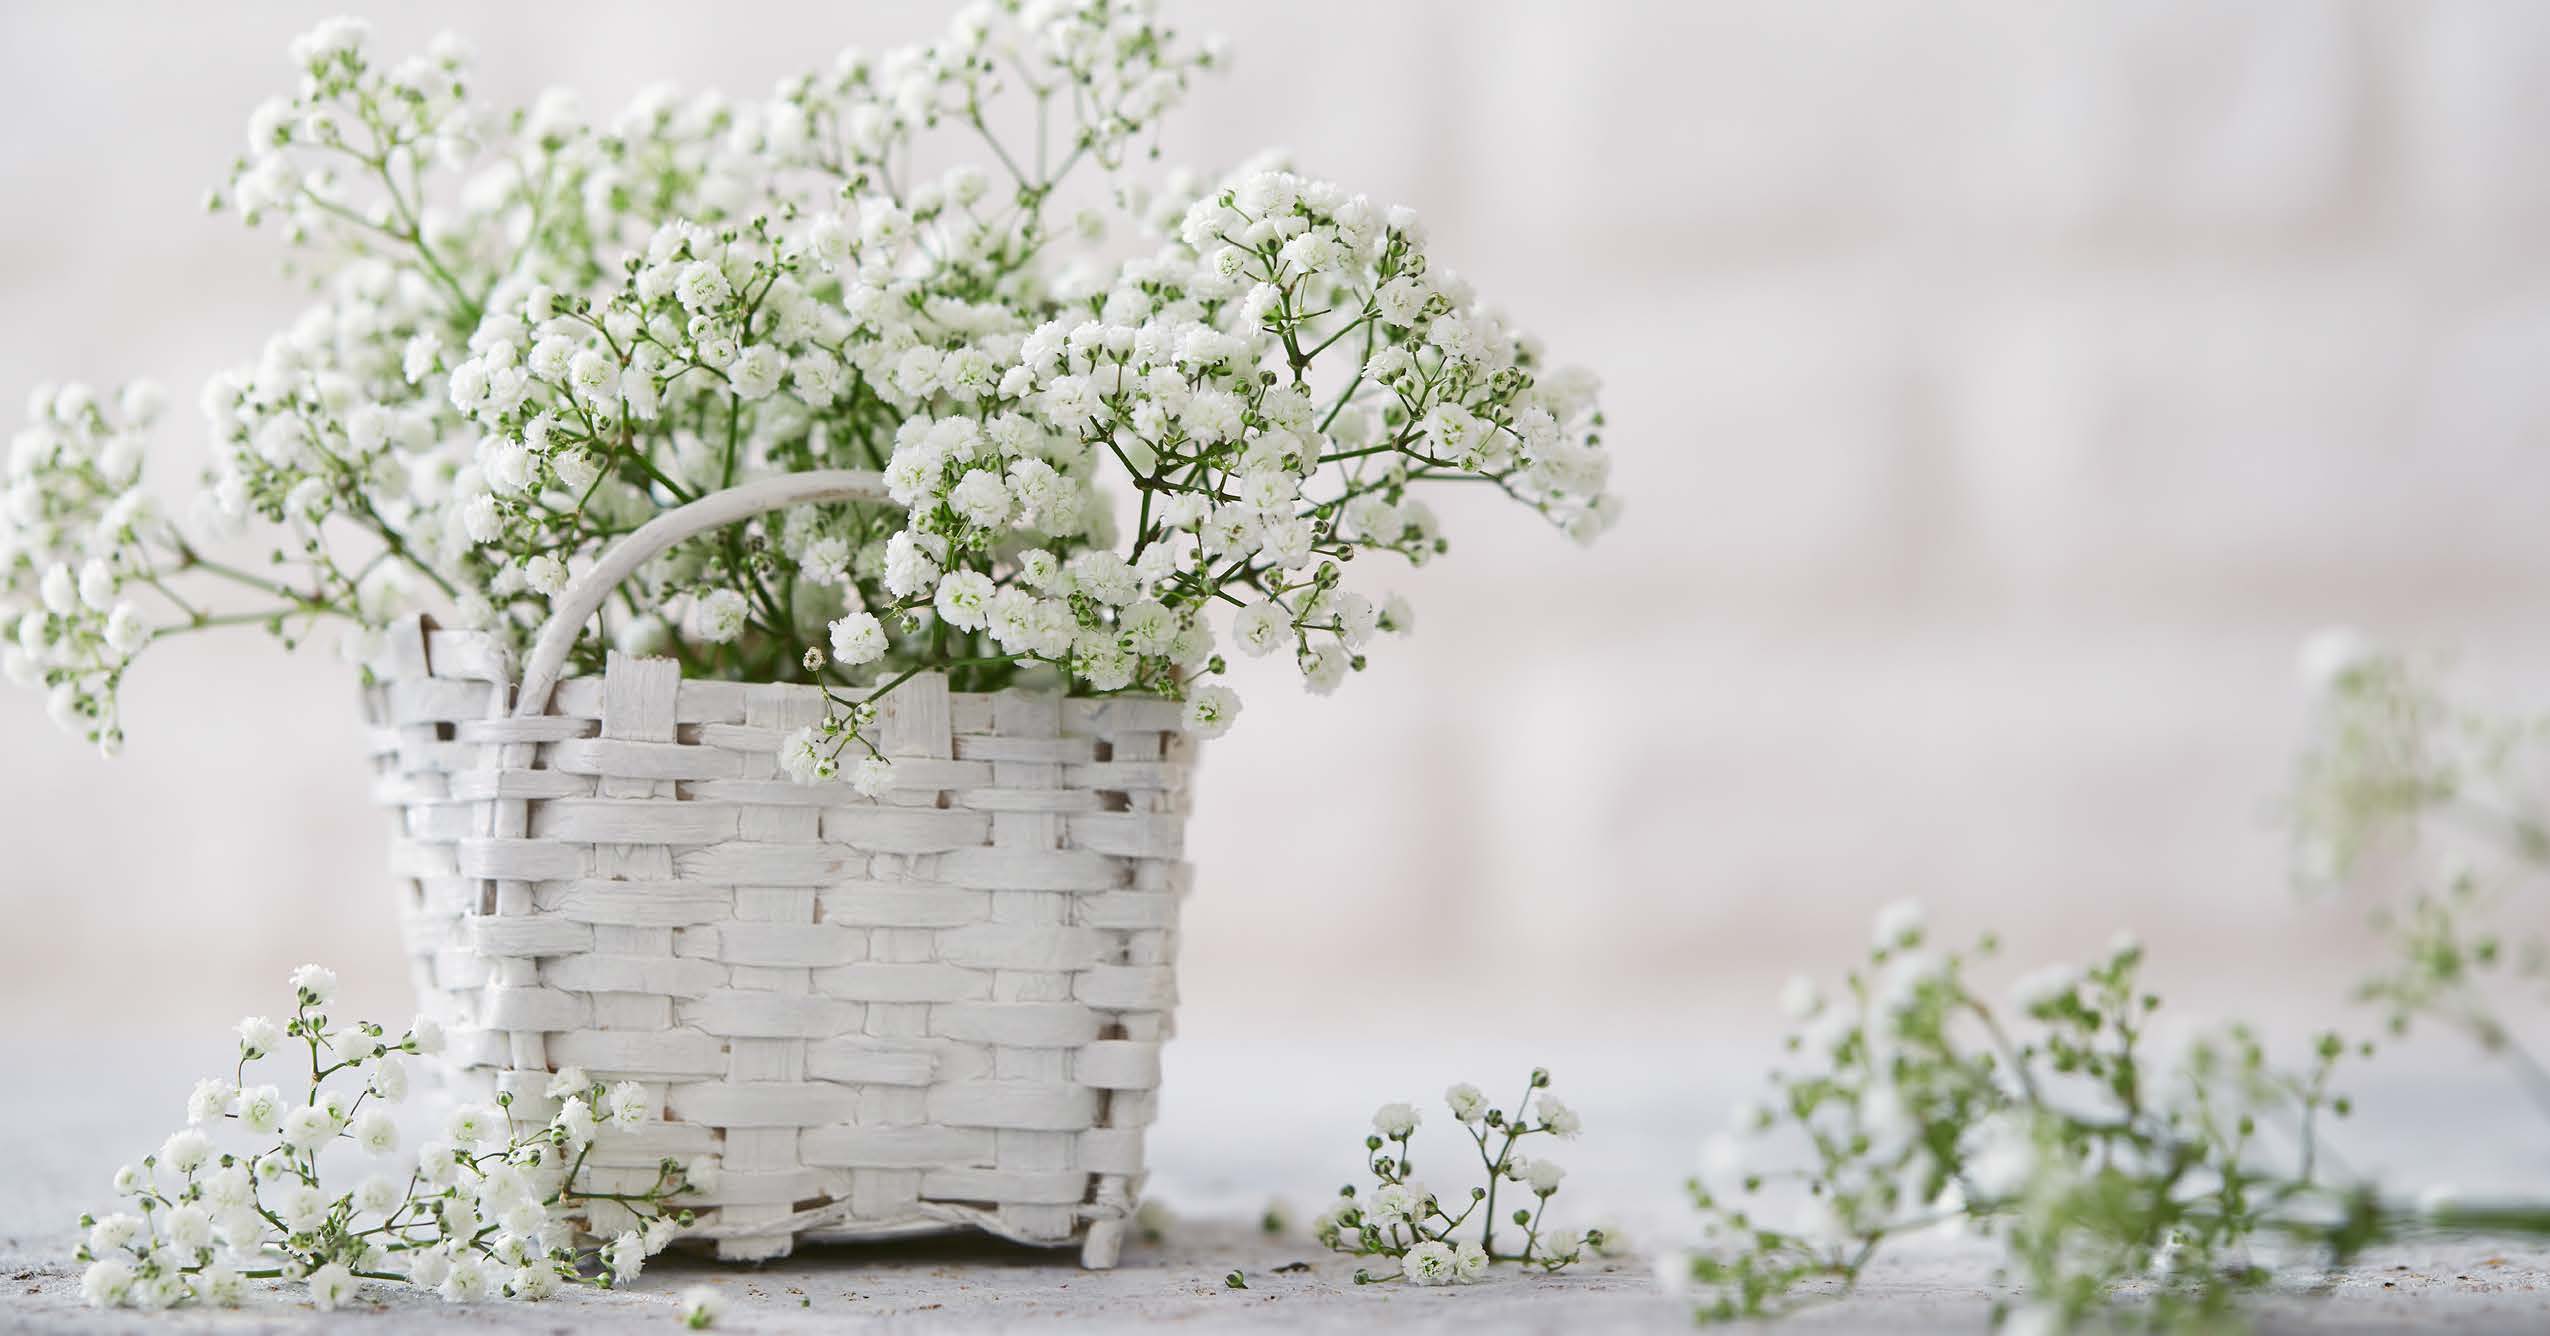 Image of florists baby's breath in a white woven basket with more babys breath scattered around.